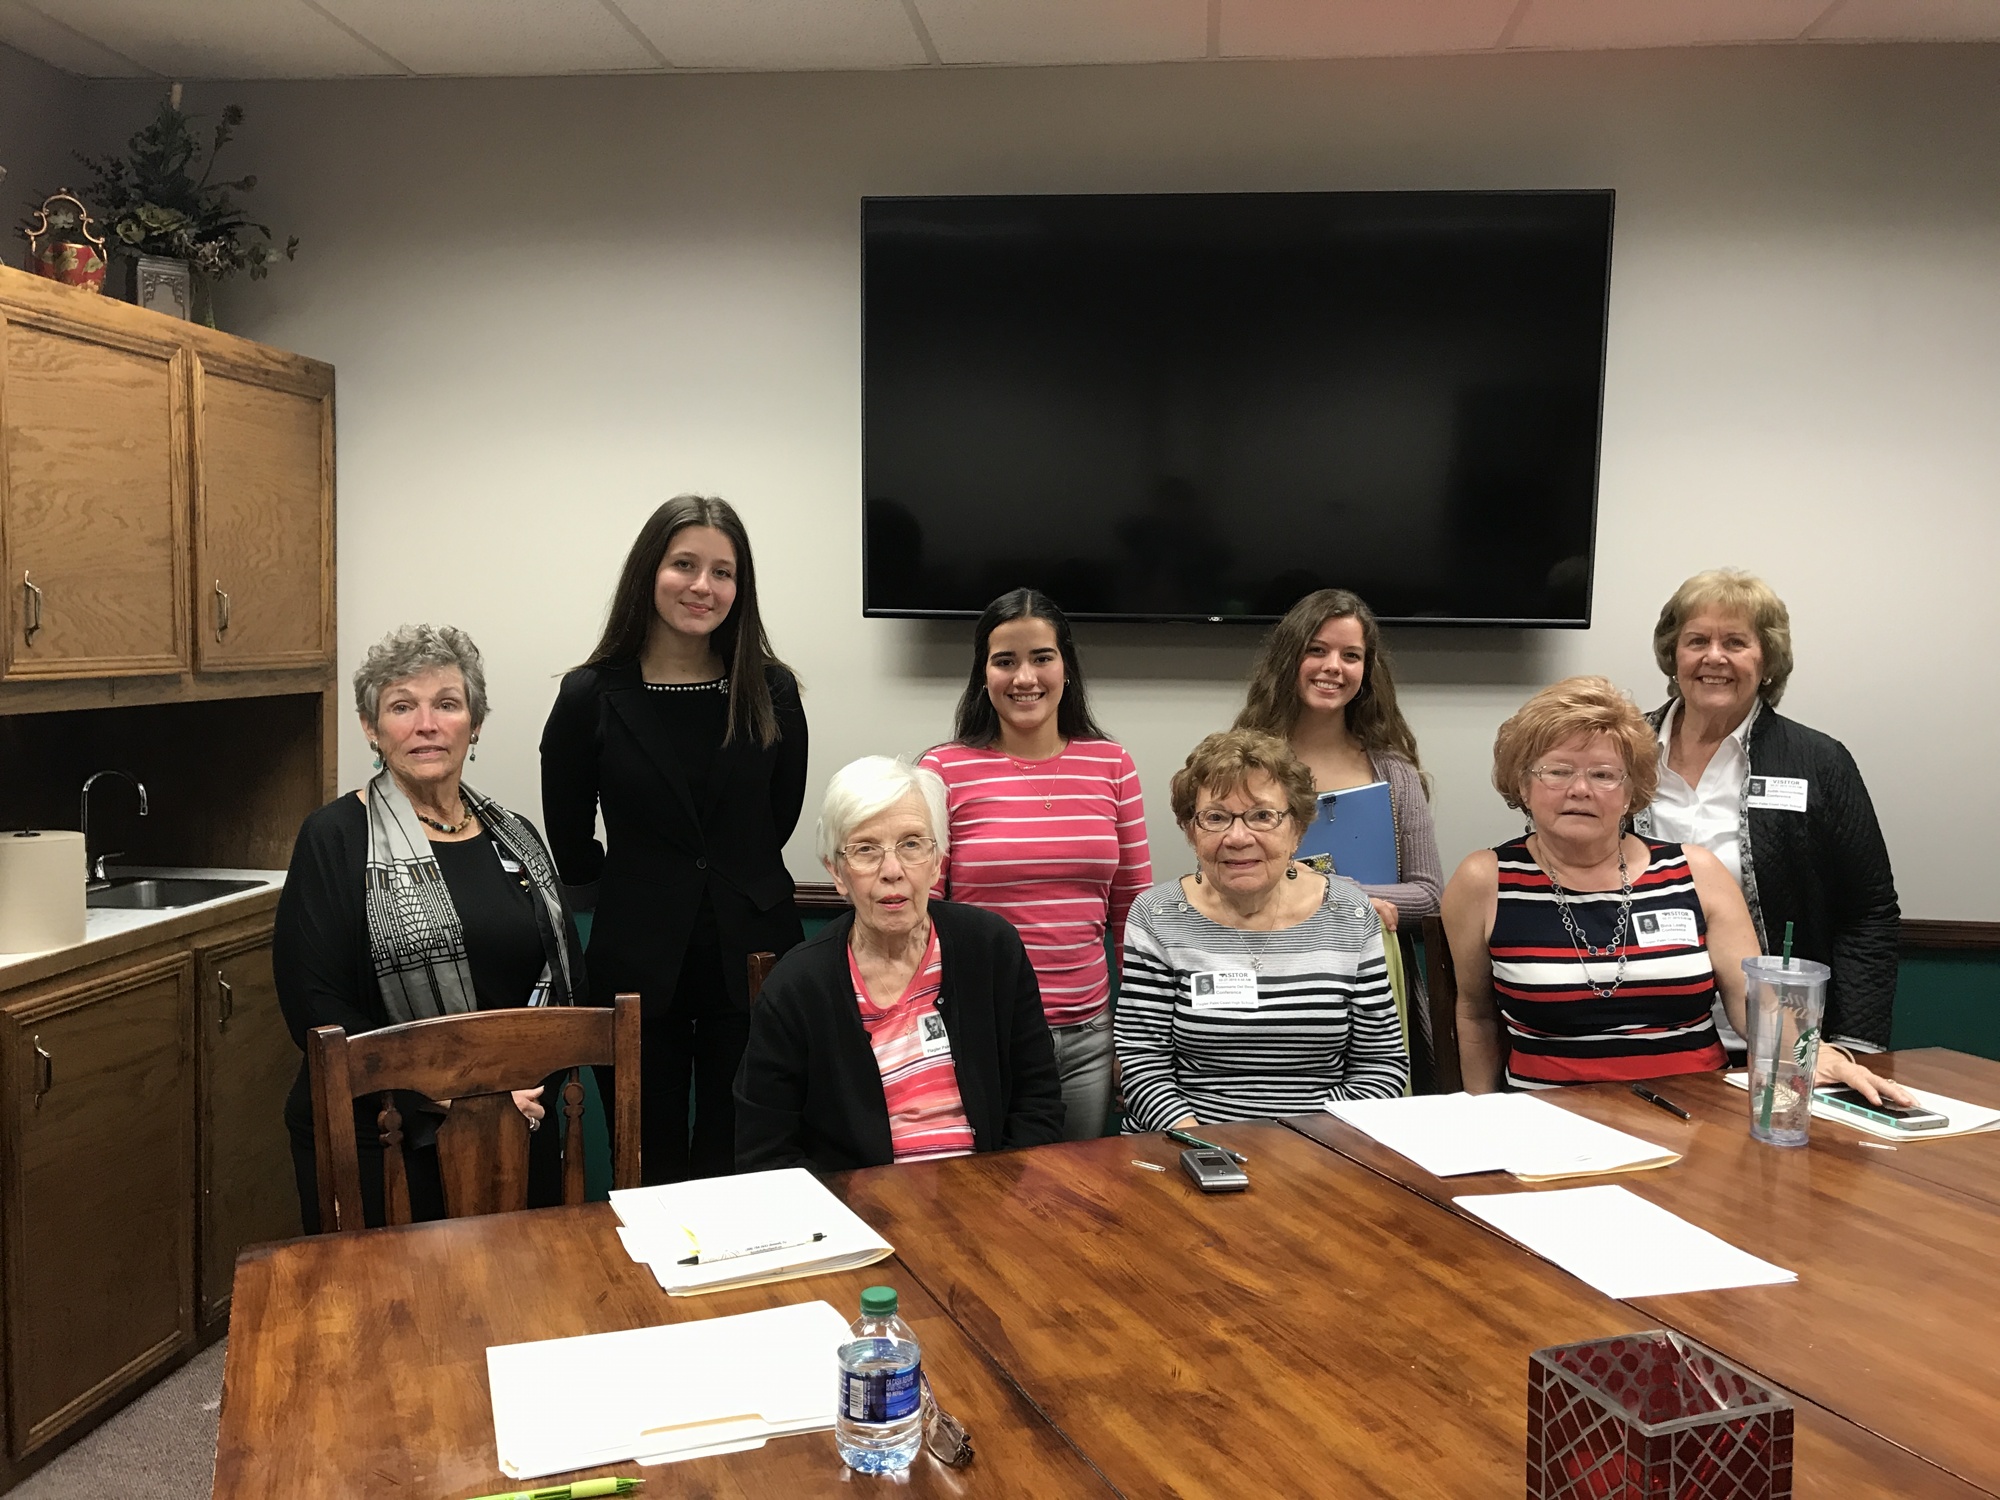 Seated: American Legion members Mary Beck, Rosemarie Delbene and Bina Leahy. Standing: Karen Smith, of the American Legion, students Michelle Berez, Diana Cuervas-Tovar and Alyssa Santore, and Judy Hennenlotter, of American Legion